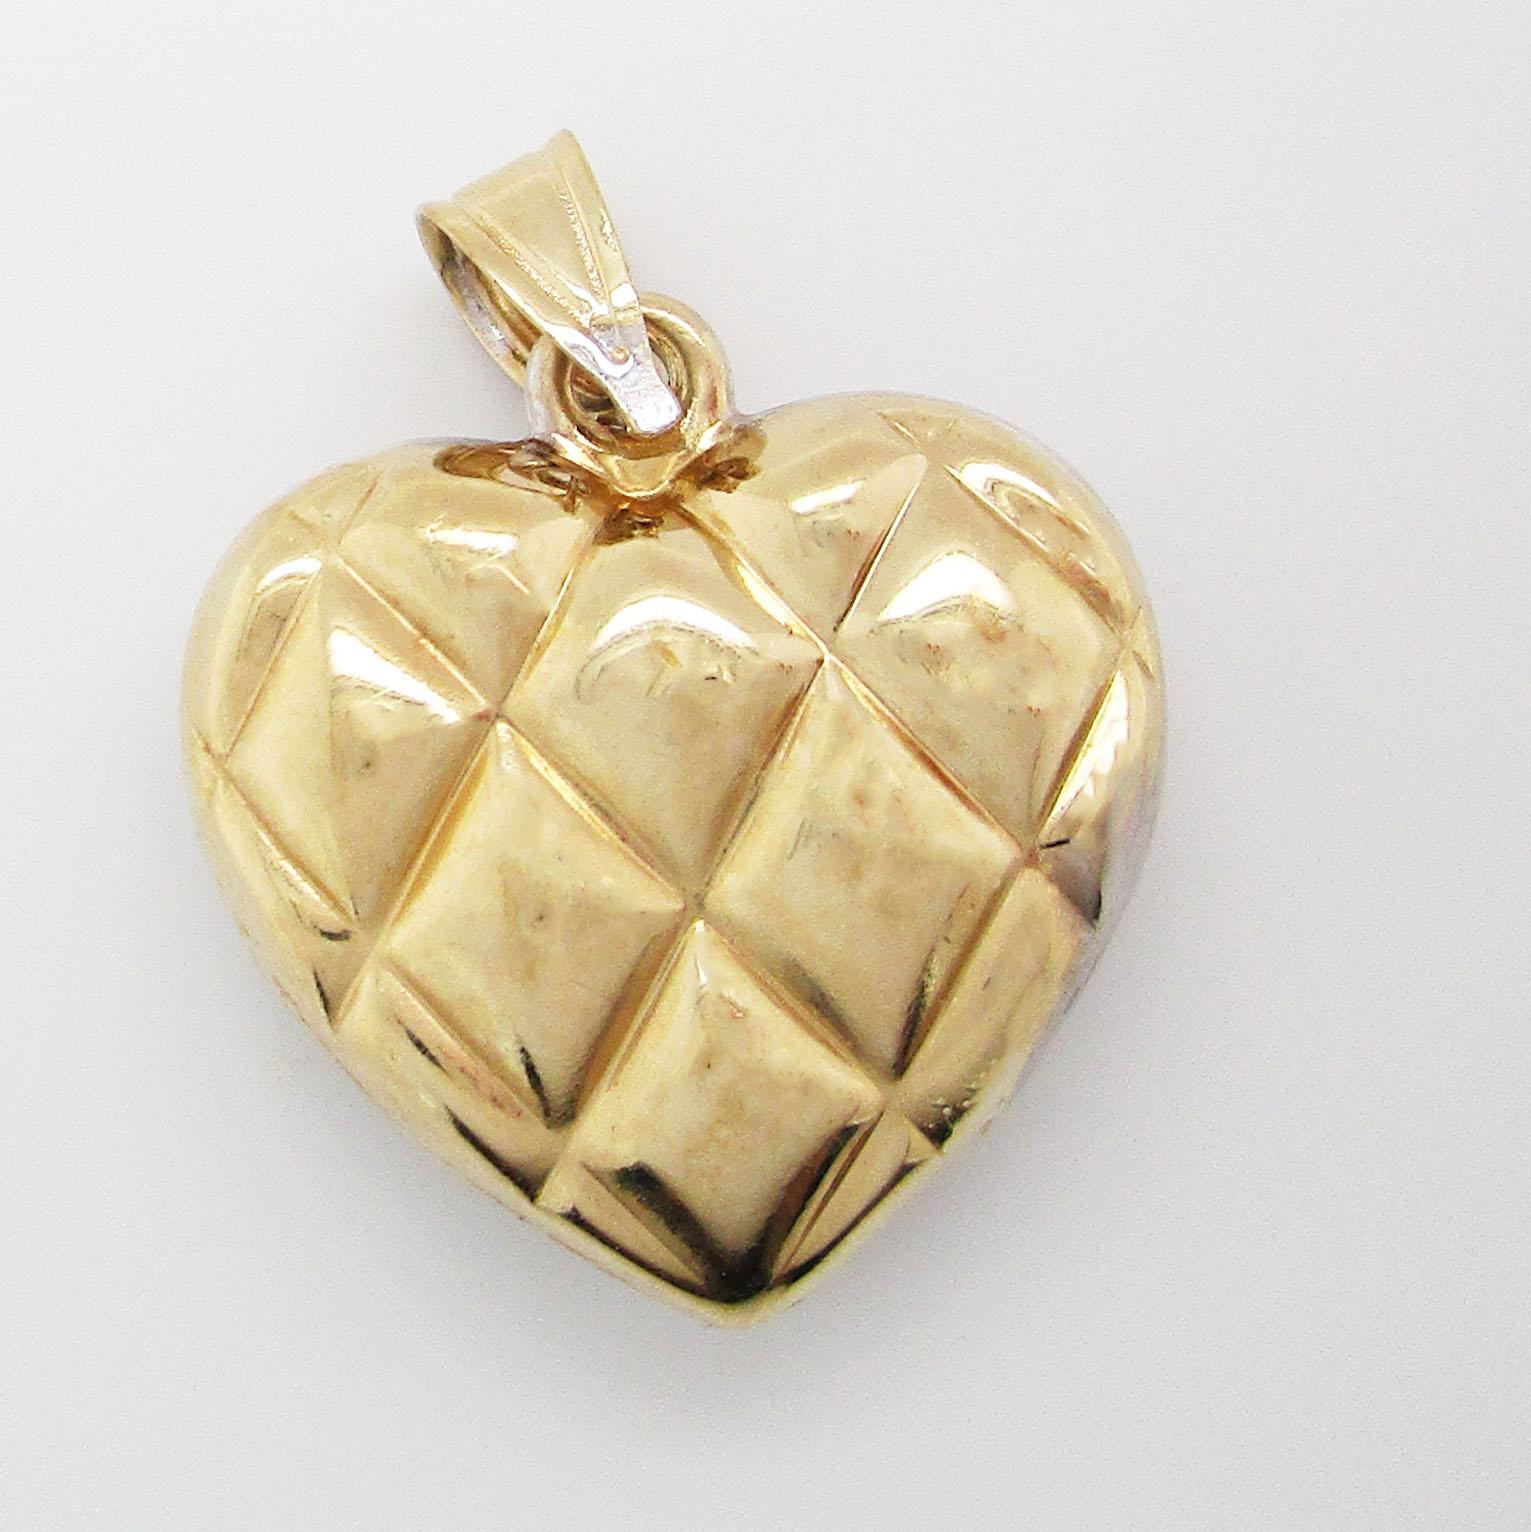 This is an adorable heart charm in 14k yellow and white gold with a cute quilted look! The two colors of gold make this charm ‘reversible’ - wear it white side up for a bright touch, or yellow side up for a warm sparkle! This charm would be perfect